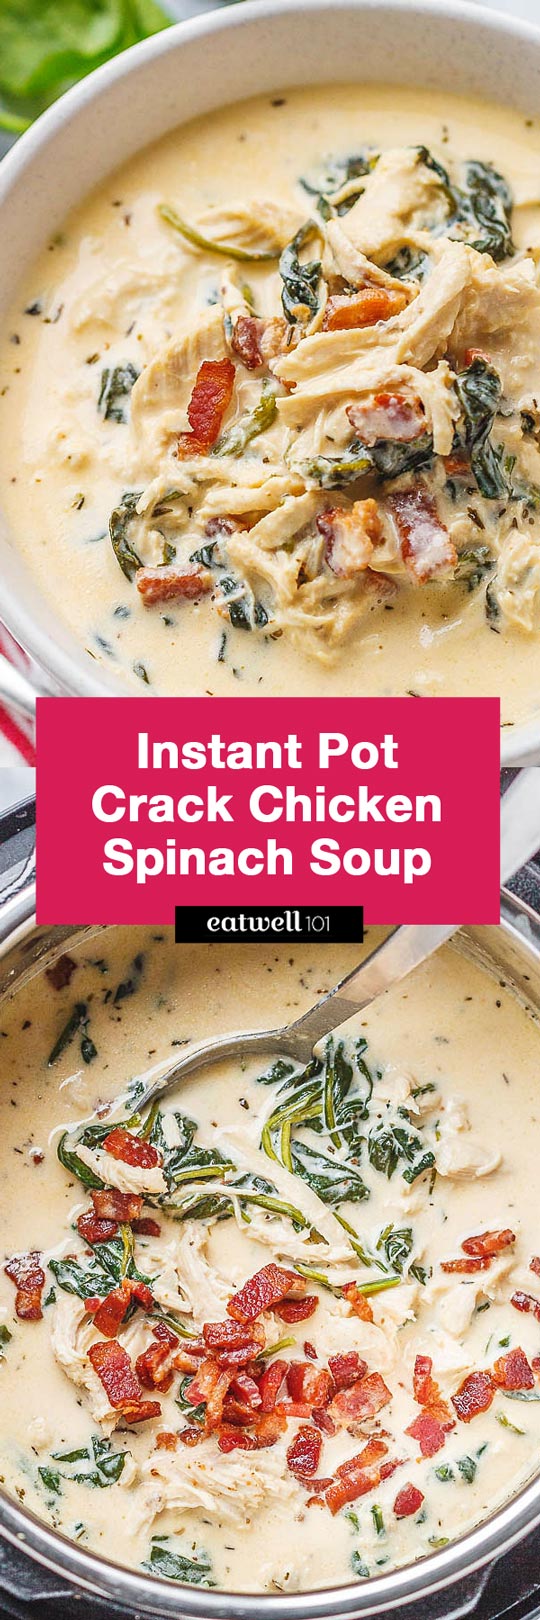 Instant-Pot Crack Chicken Spinach Soup Recipe - Packed with flavors and so speedy to prep, this Instant Pot crack #chicken #spinach #soup is your next favorite!